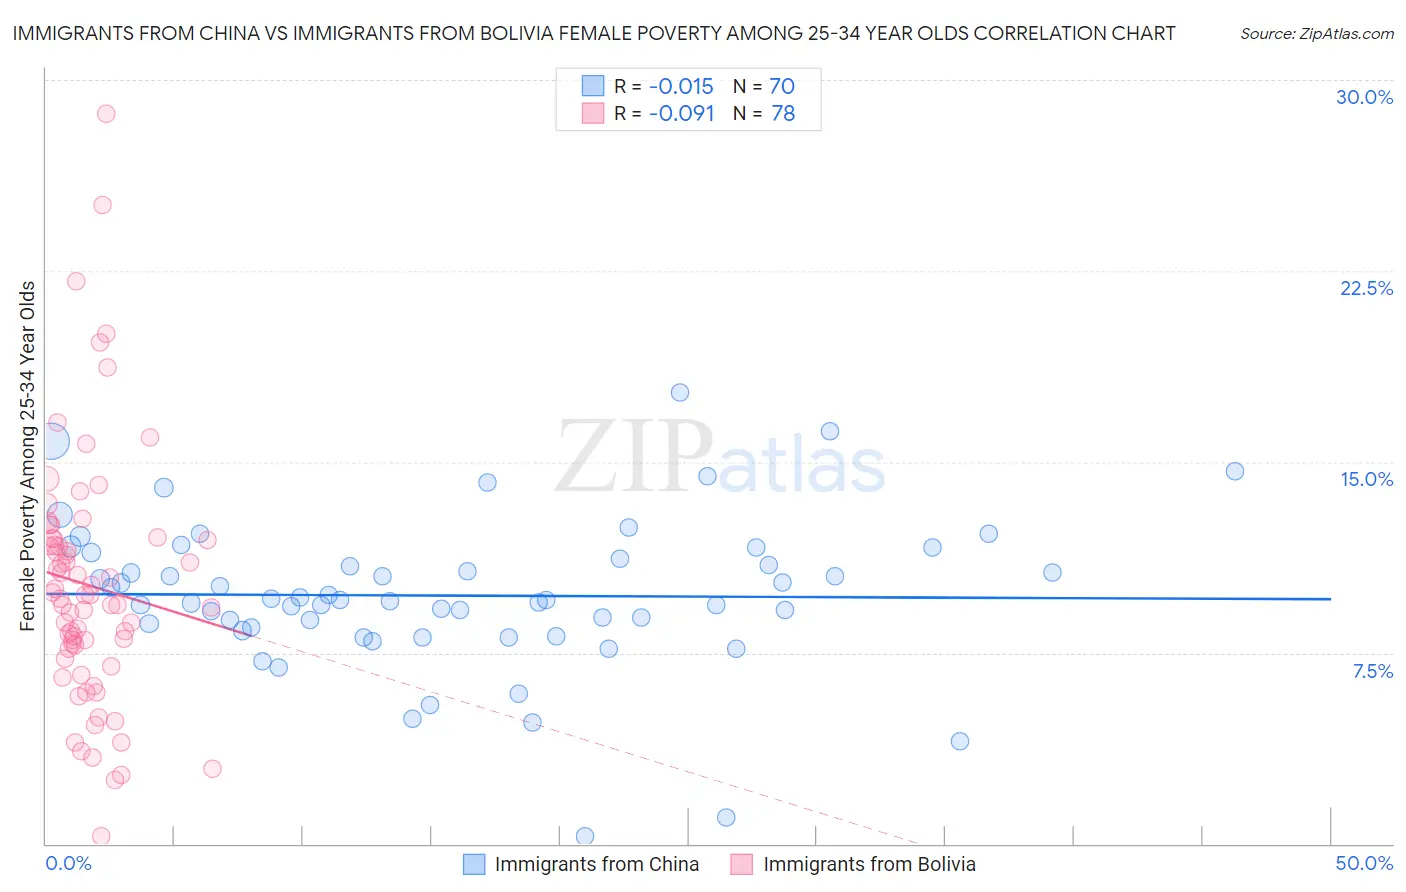 Immigrants from China vs Immigrants from Bolivia Female Poverty Among 25-34 Year Olds